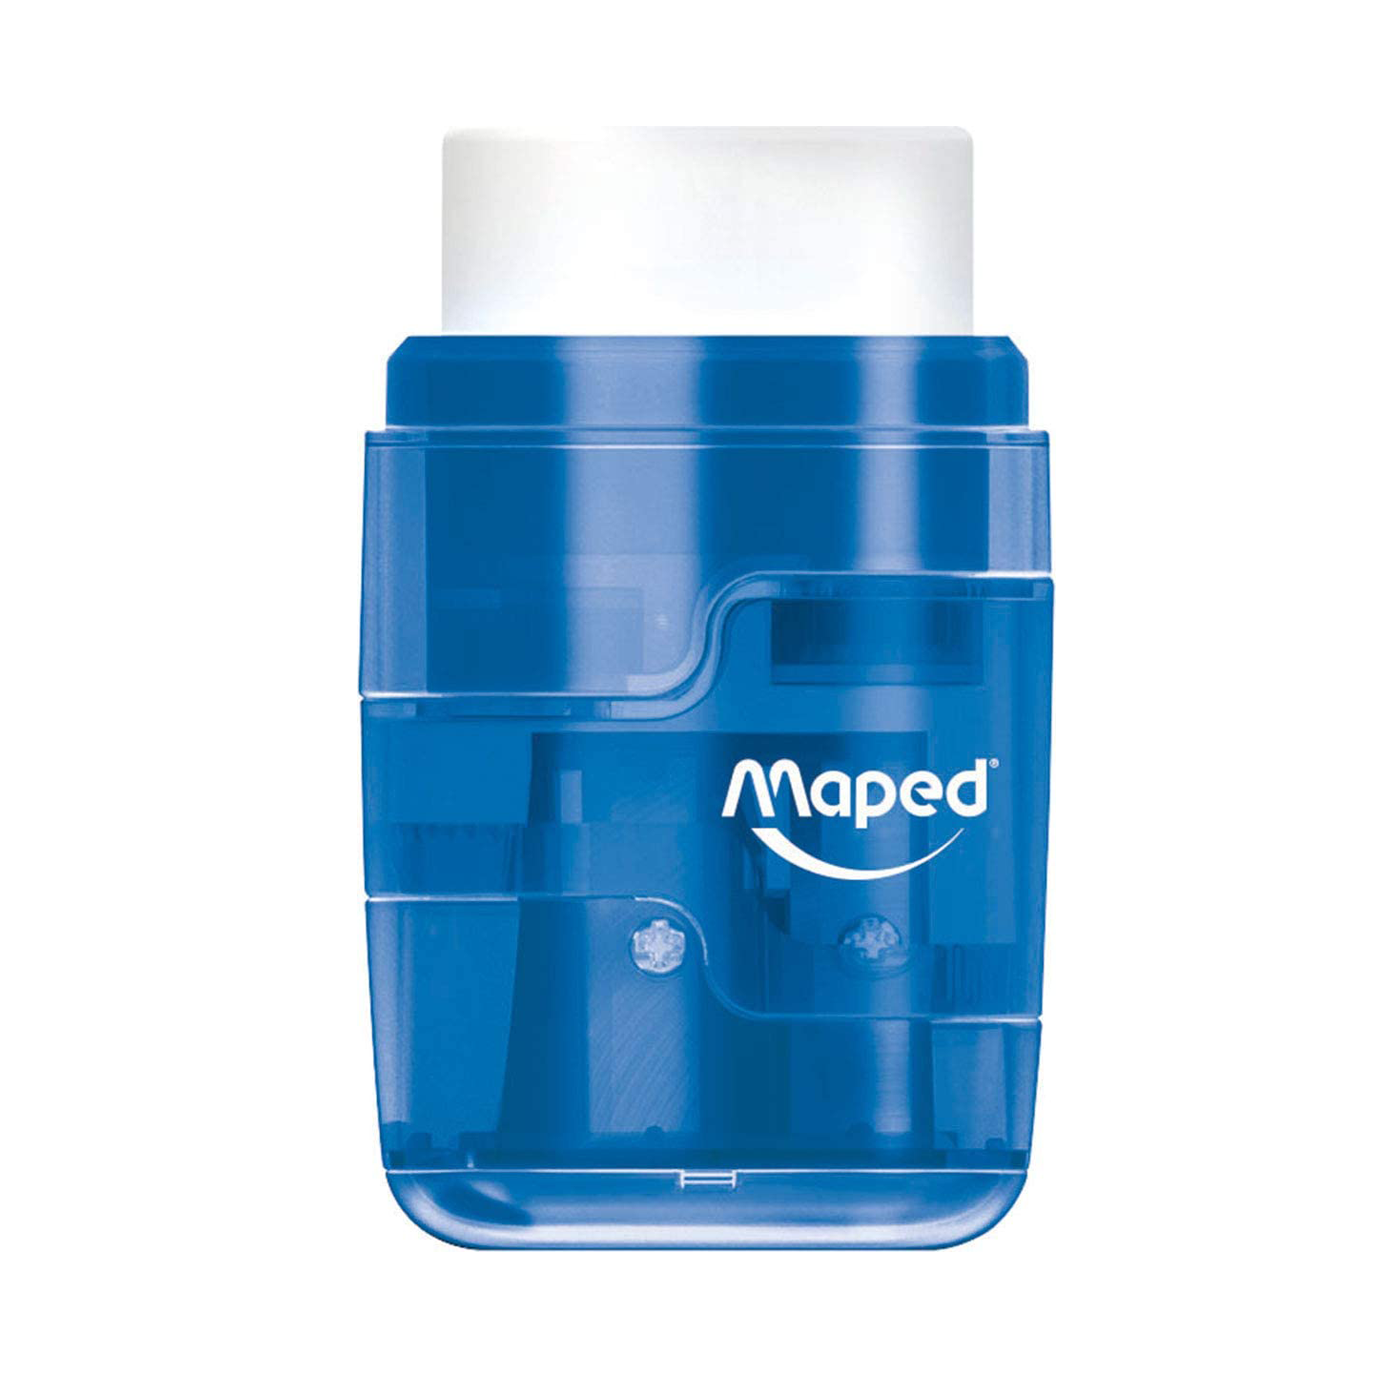 Maped Connect 2 Hole Pencil Sharpener & Eraser With Cannister Blue